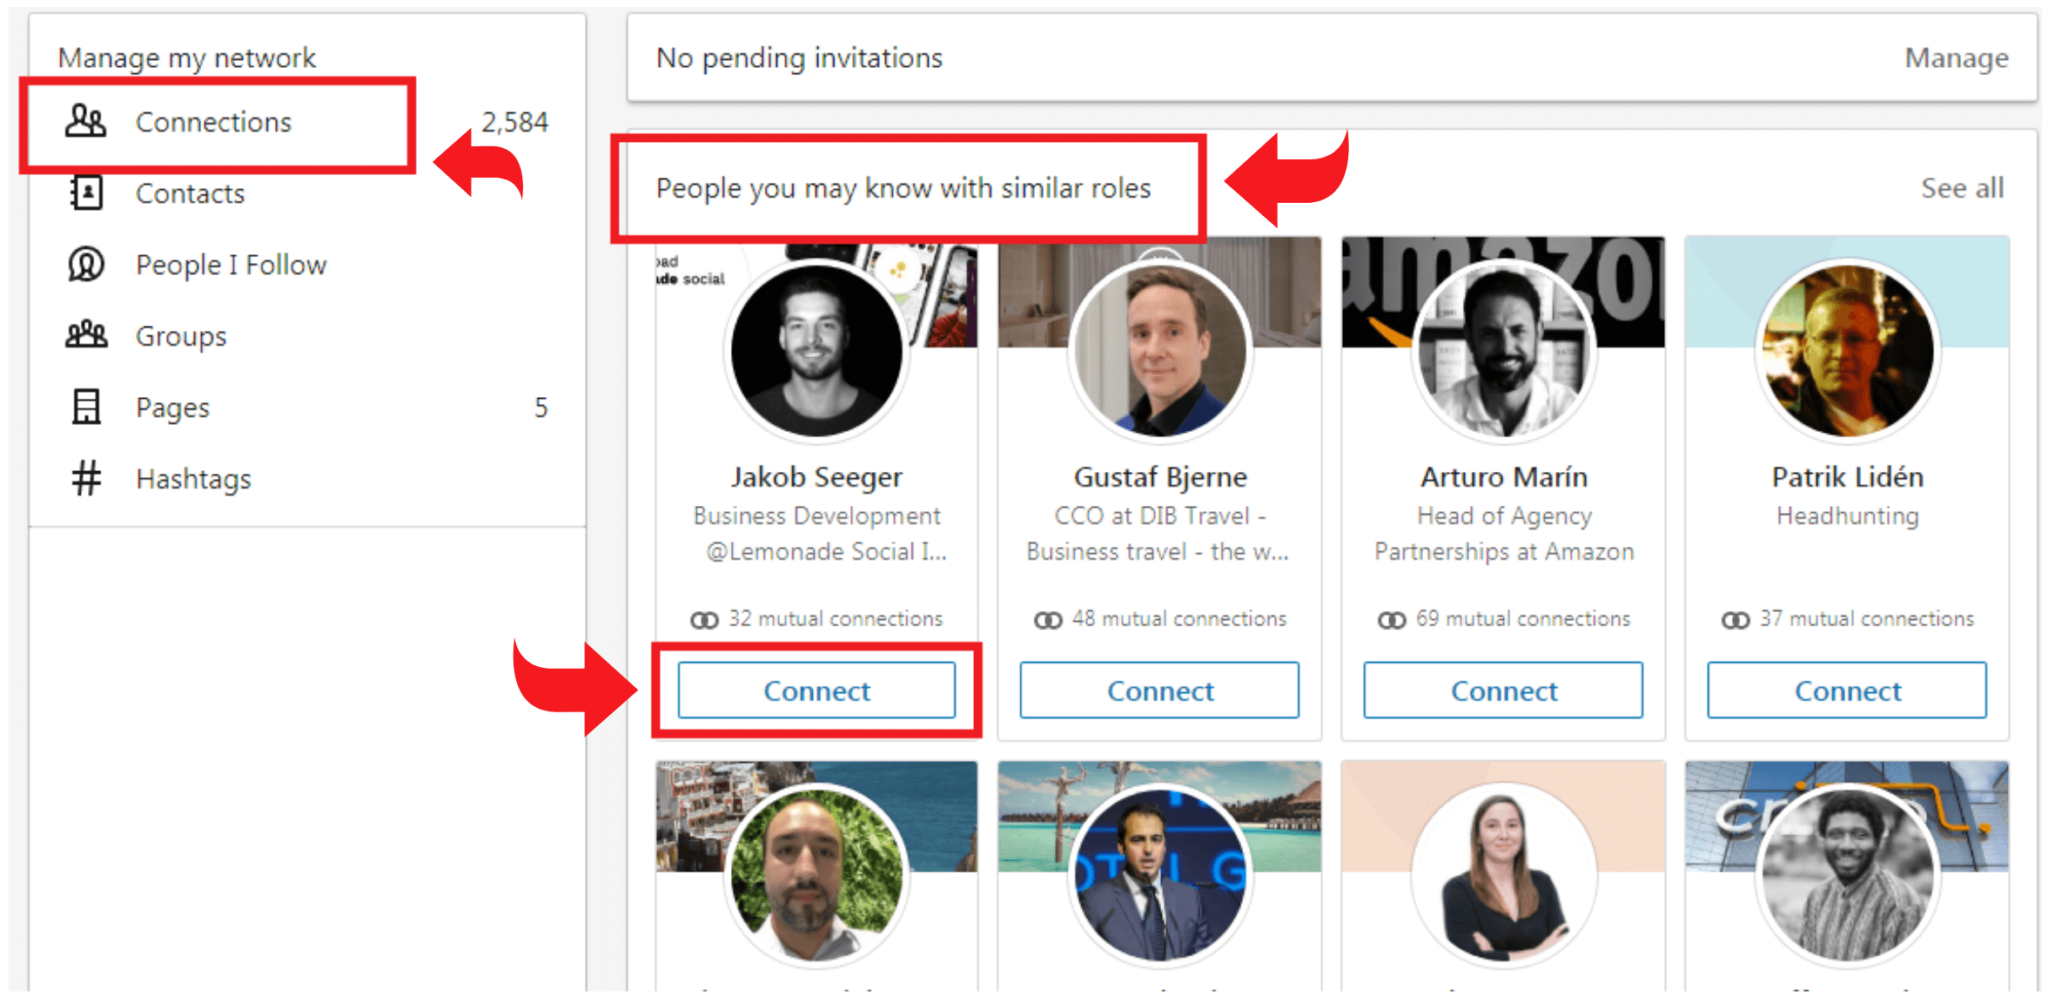 Best LinkedIn Invite Message to Build Your Network Fast - Octopus CRM